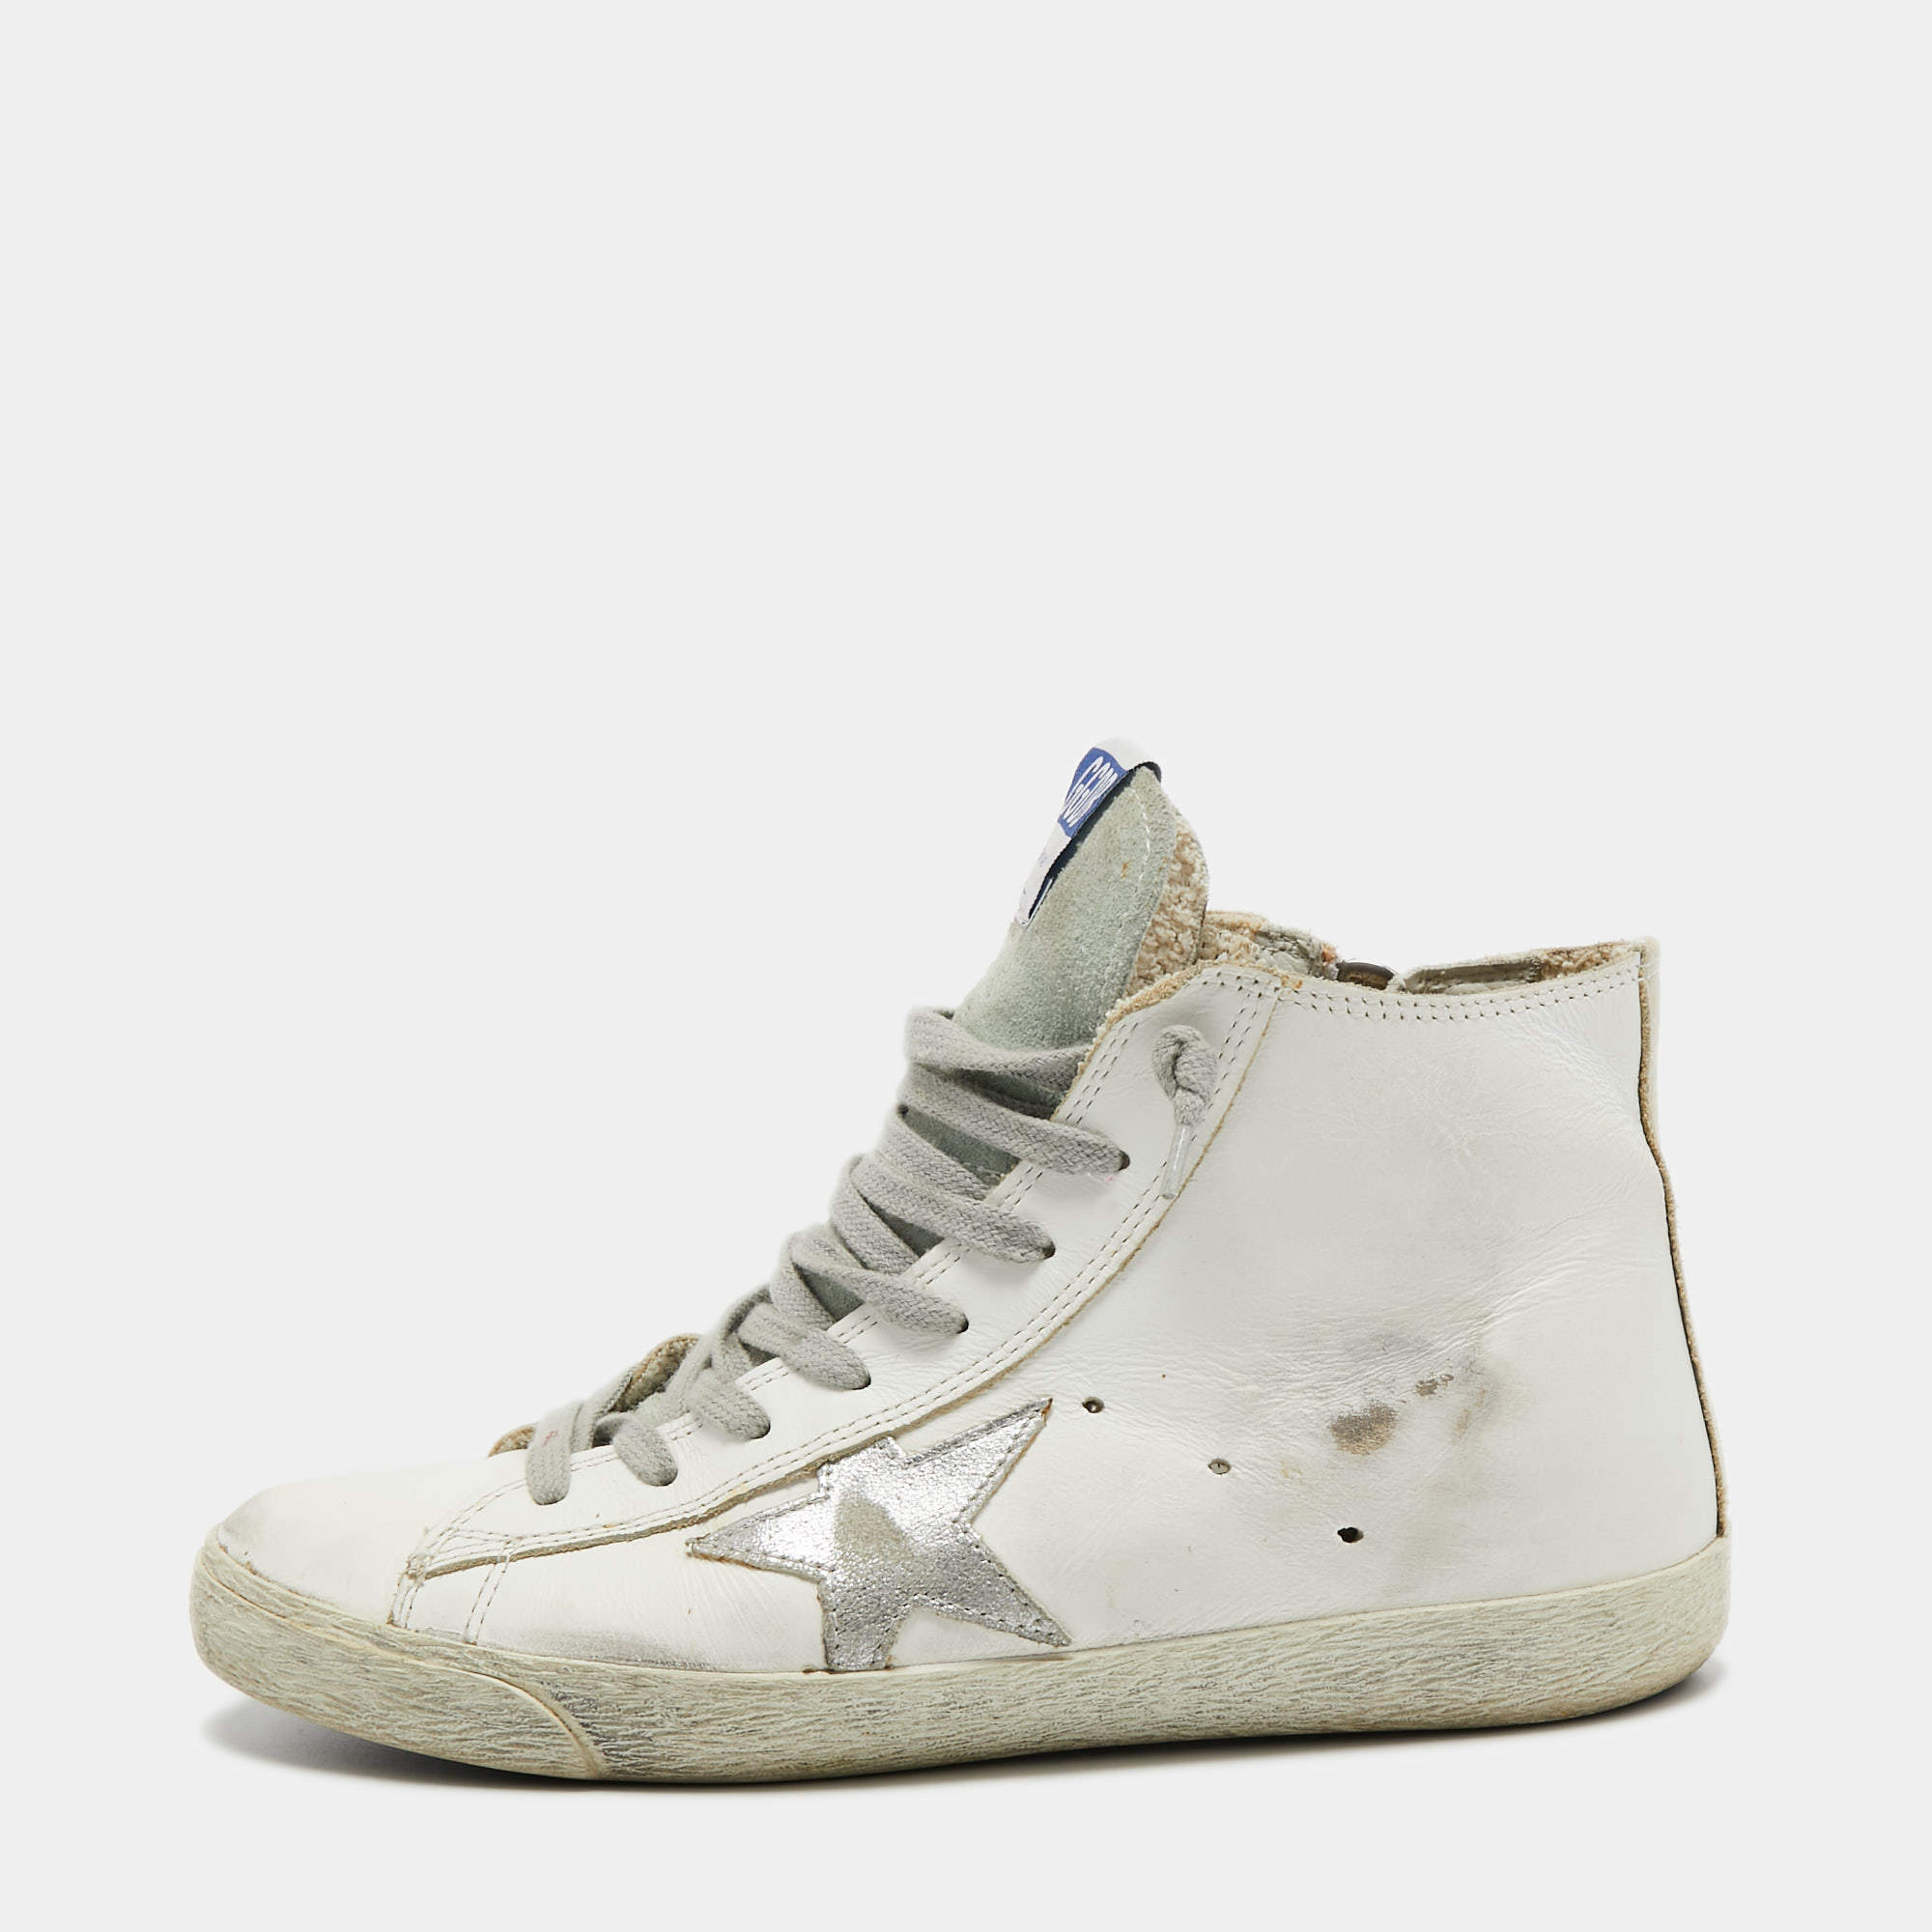 Golden Goose White Leather Francy Sneakers Size  37